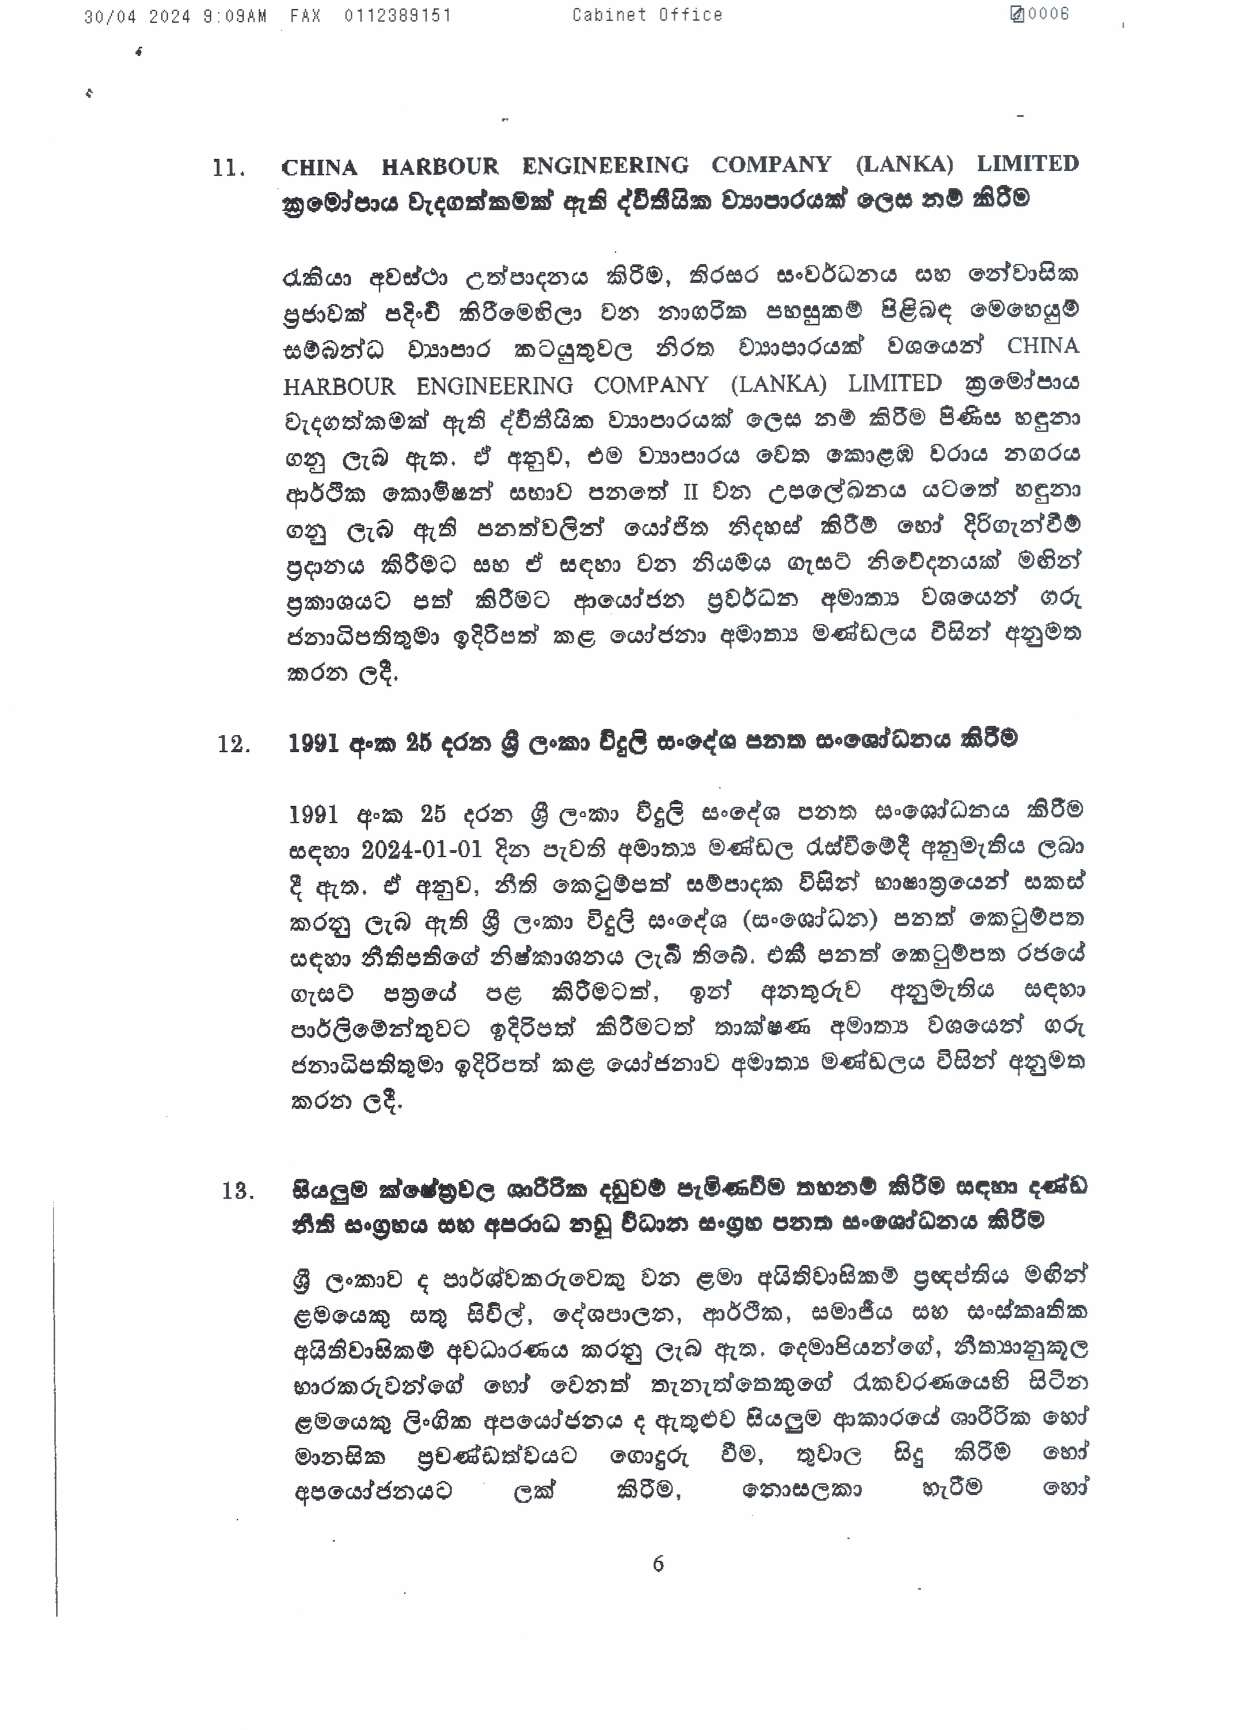 Cabinet Decision on 29.04.2024 page 0006